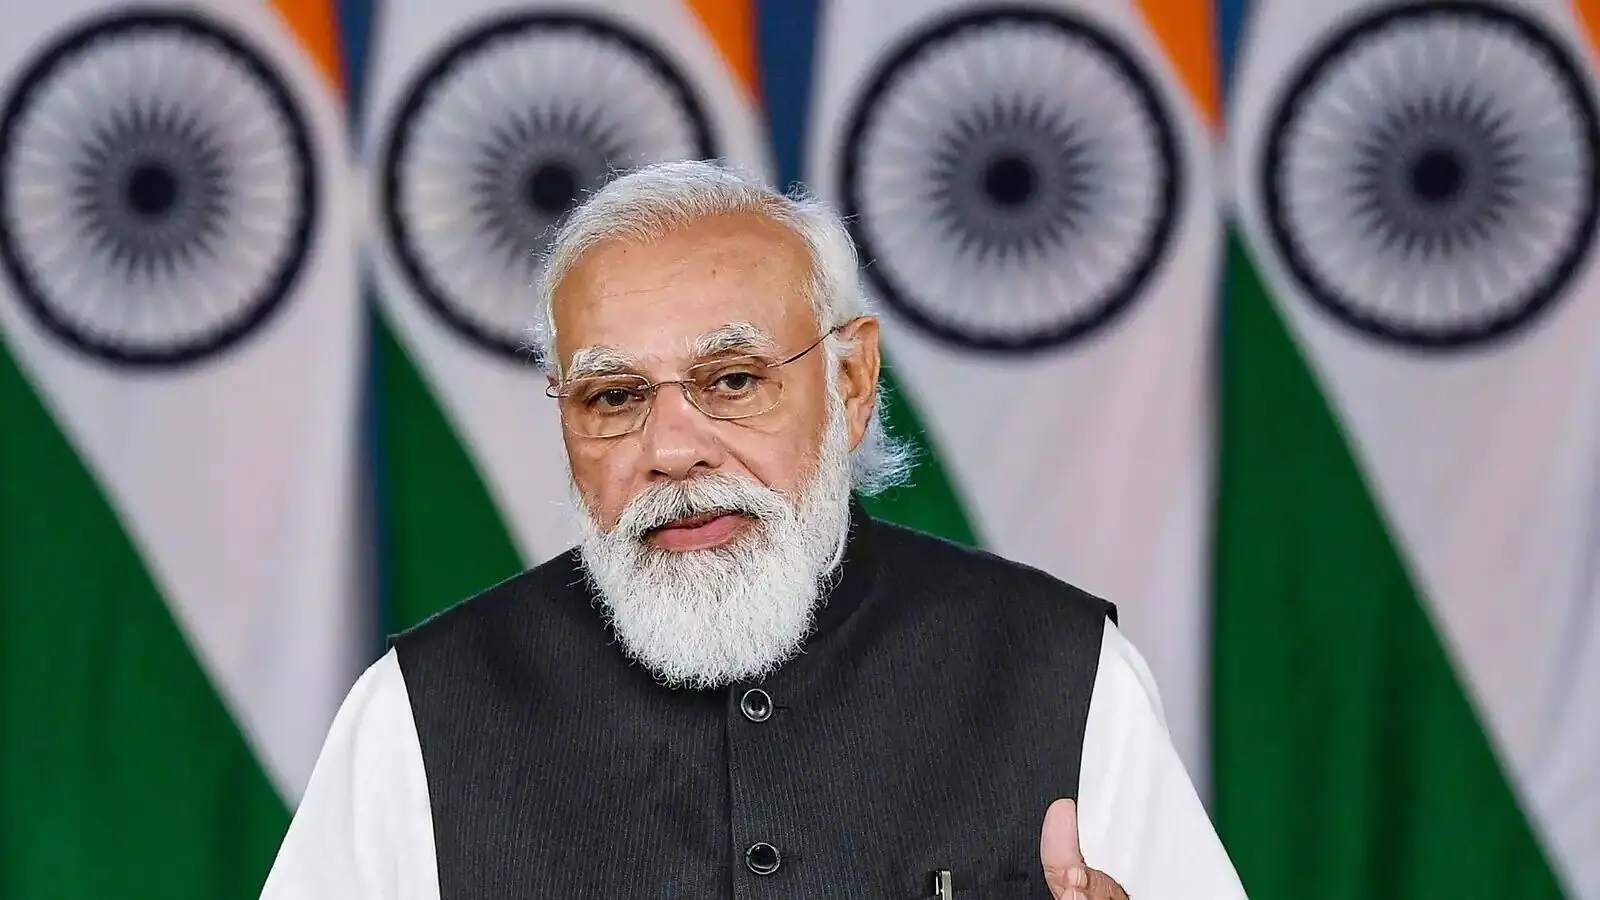 PM Modi to share his thoughts in Mann Ki Baat programme at 11.30 AM today